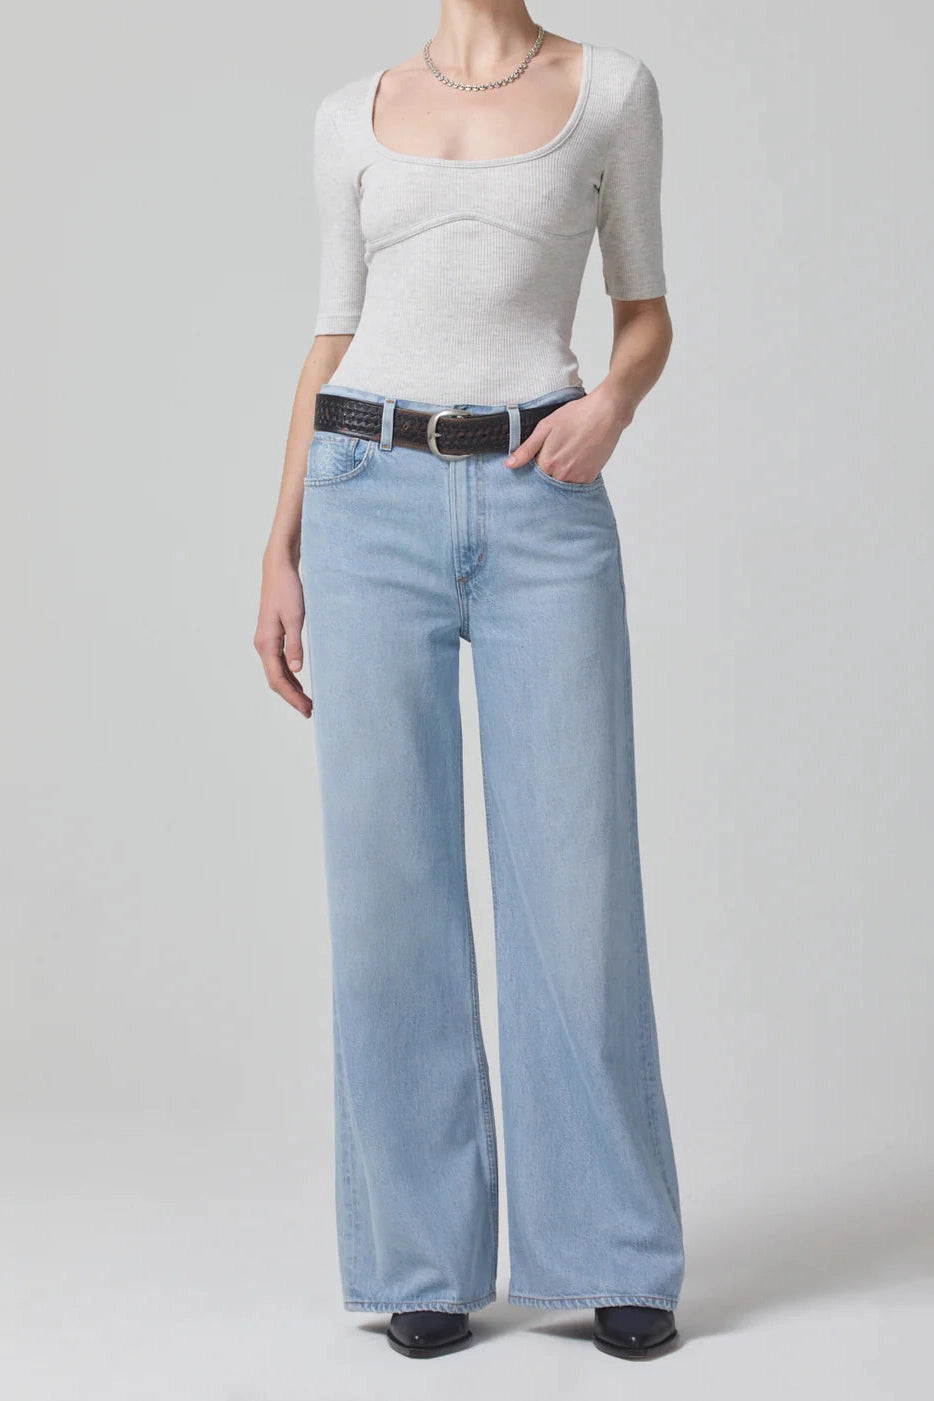 CITIZENS OF HUMANITY PALOMA BAGGY JEANS IN ALEMAYDE